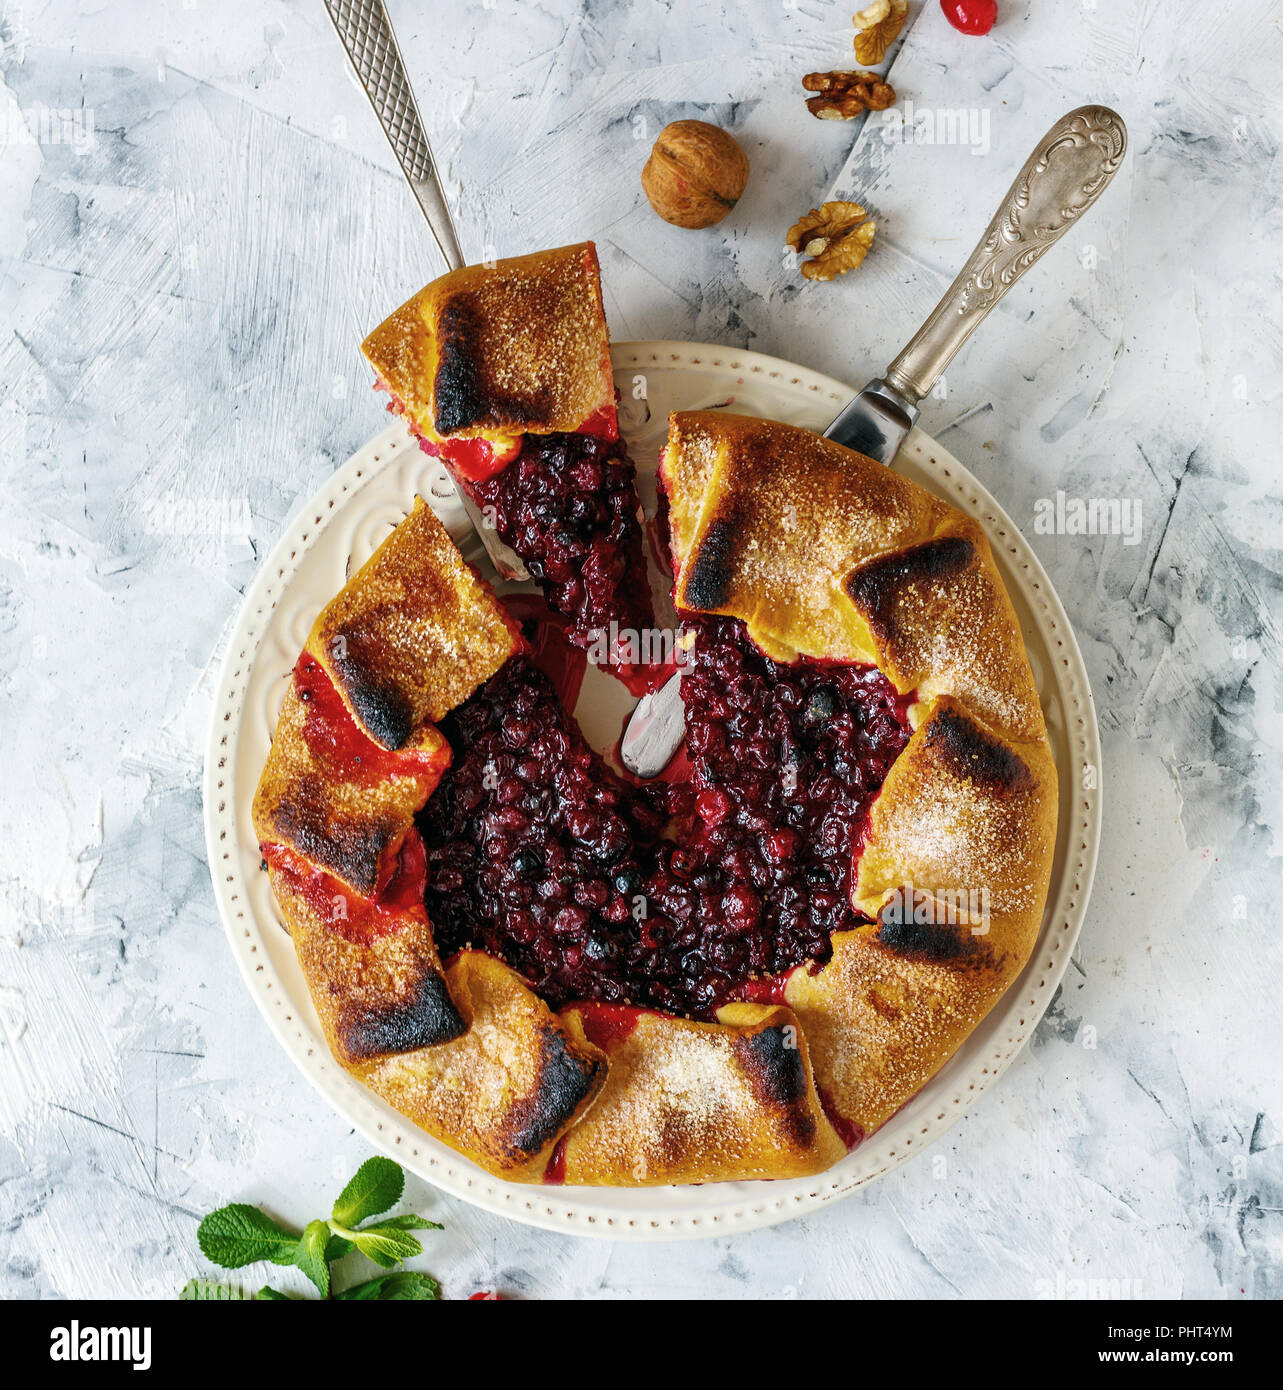 Plate with sliced cranberry free-form pie(galette). Stock Photo